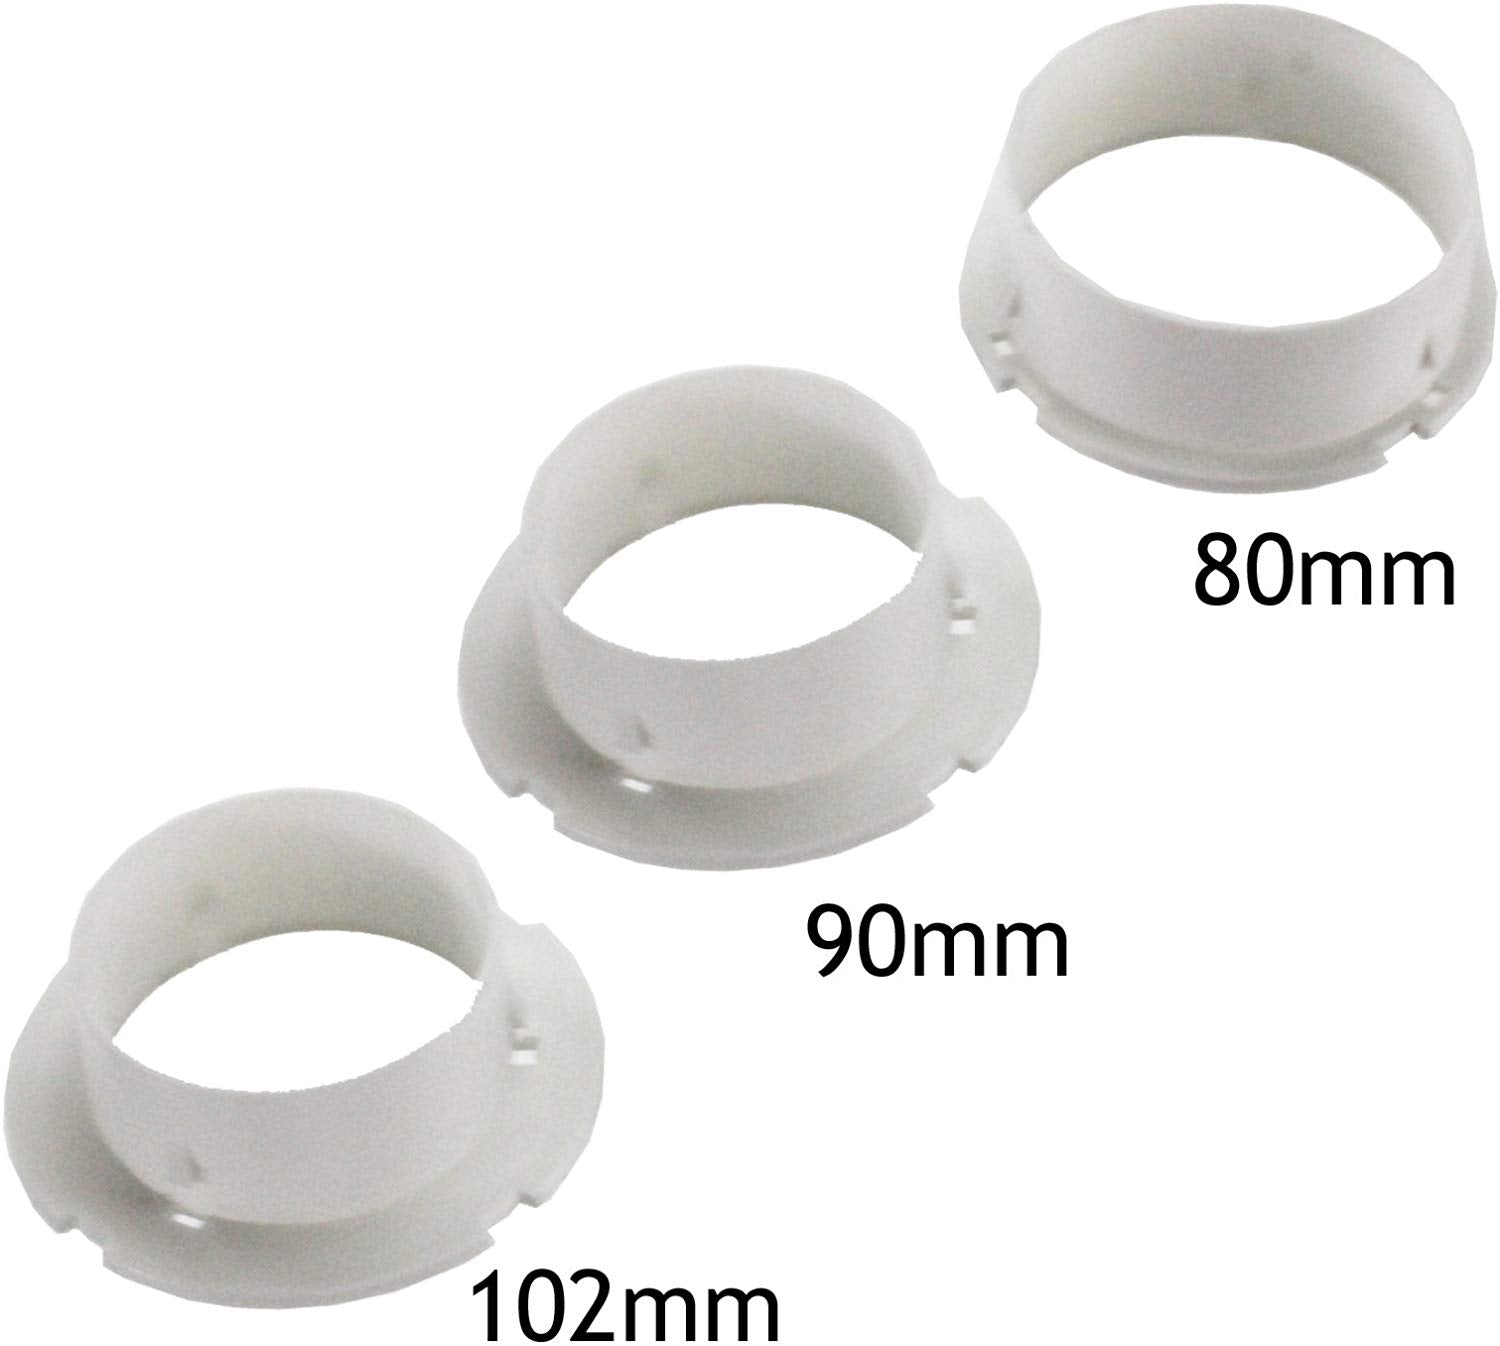 Vent Hose Condenser Kit with 3 x Adapters for Indesit Tumble Dryer (1.2m)